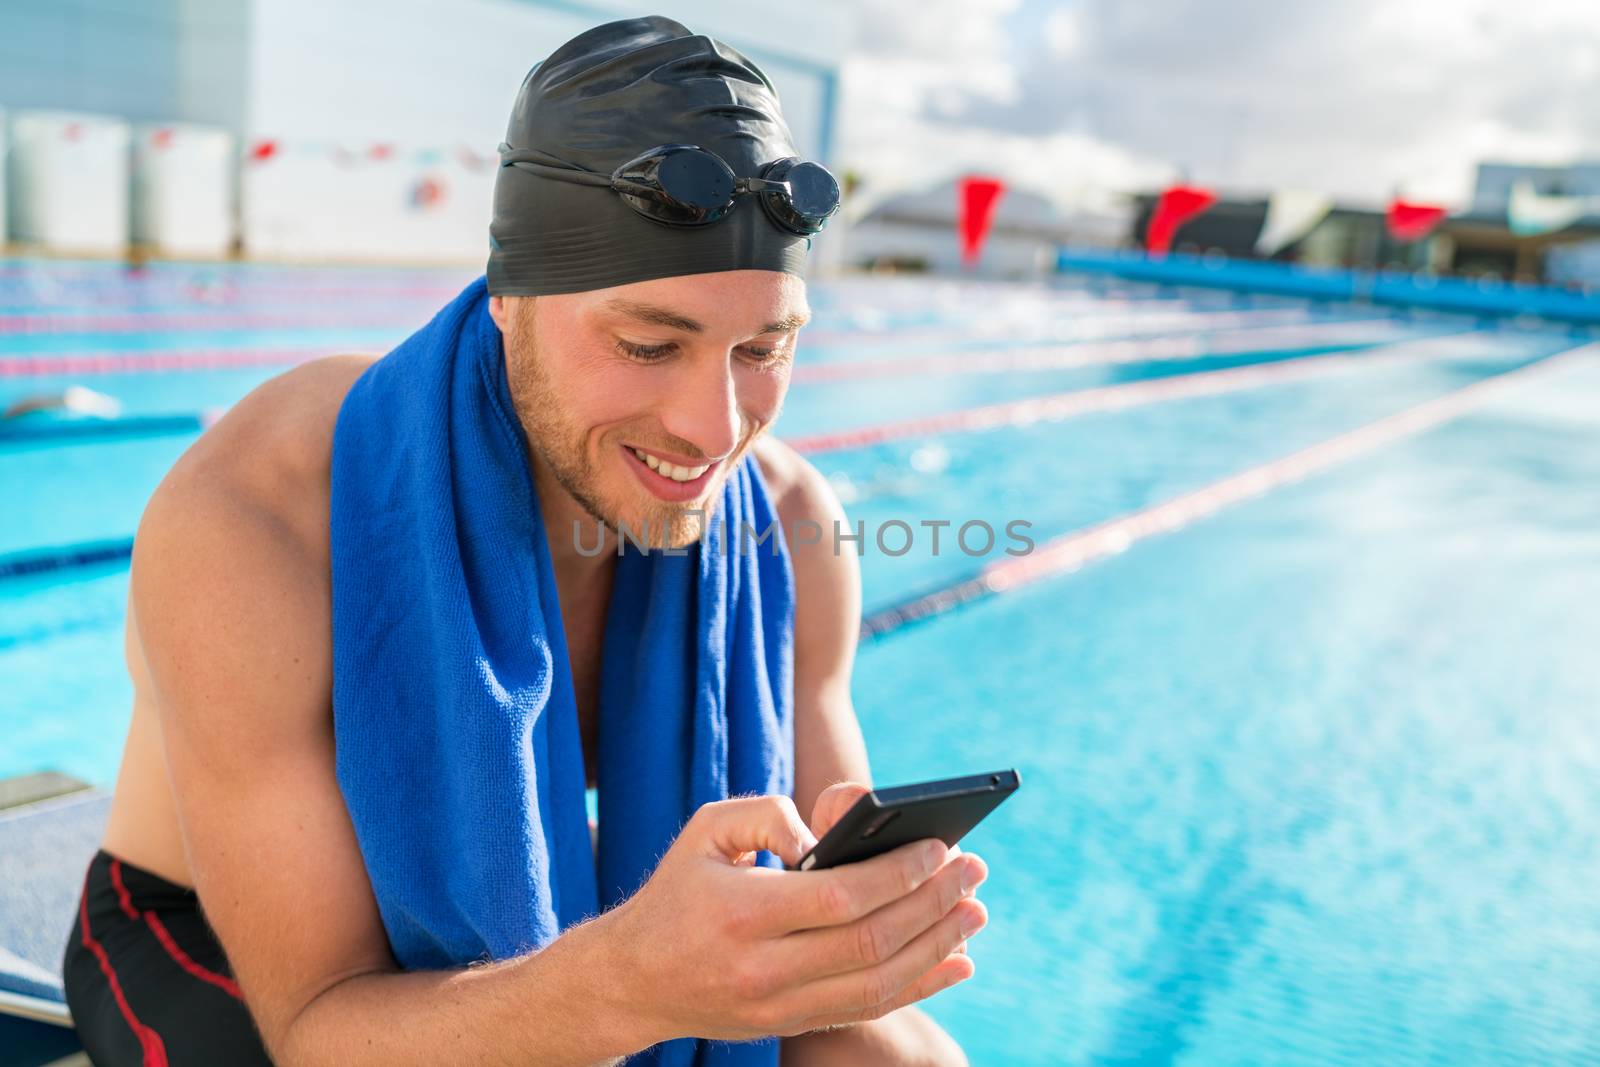 Swimmer man with swimming cap and goggles at pool using his mobile phone texting on smartphone app after training in outdoor pool. Happy athlete holding cellphone at fitness centre.